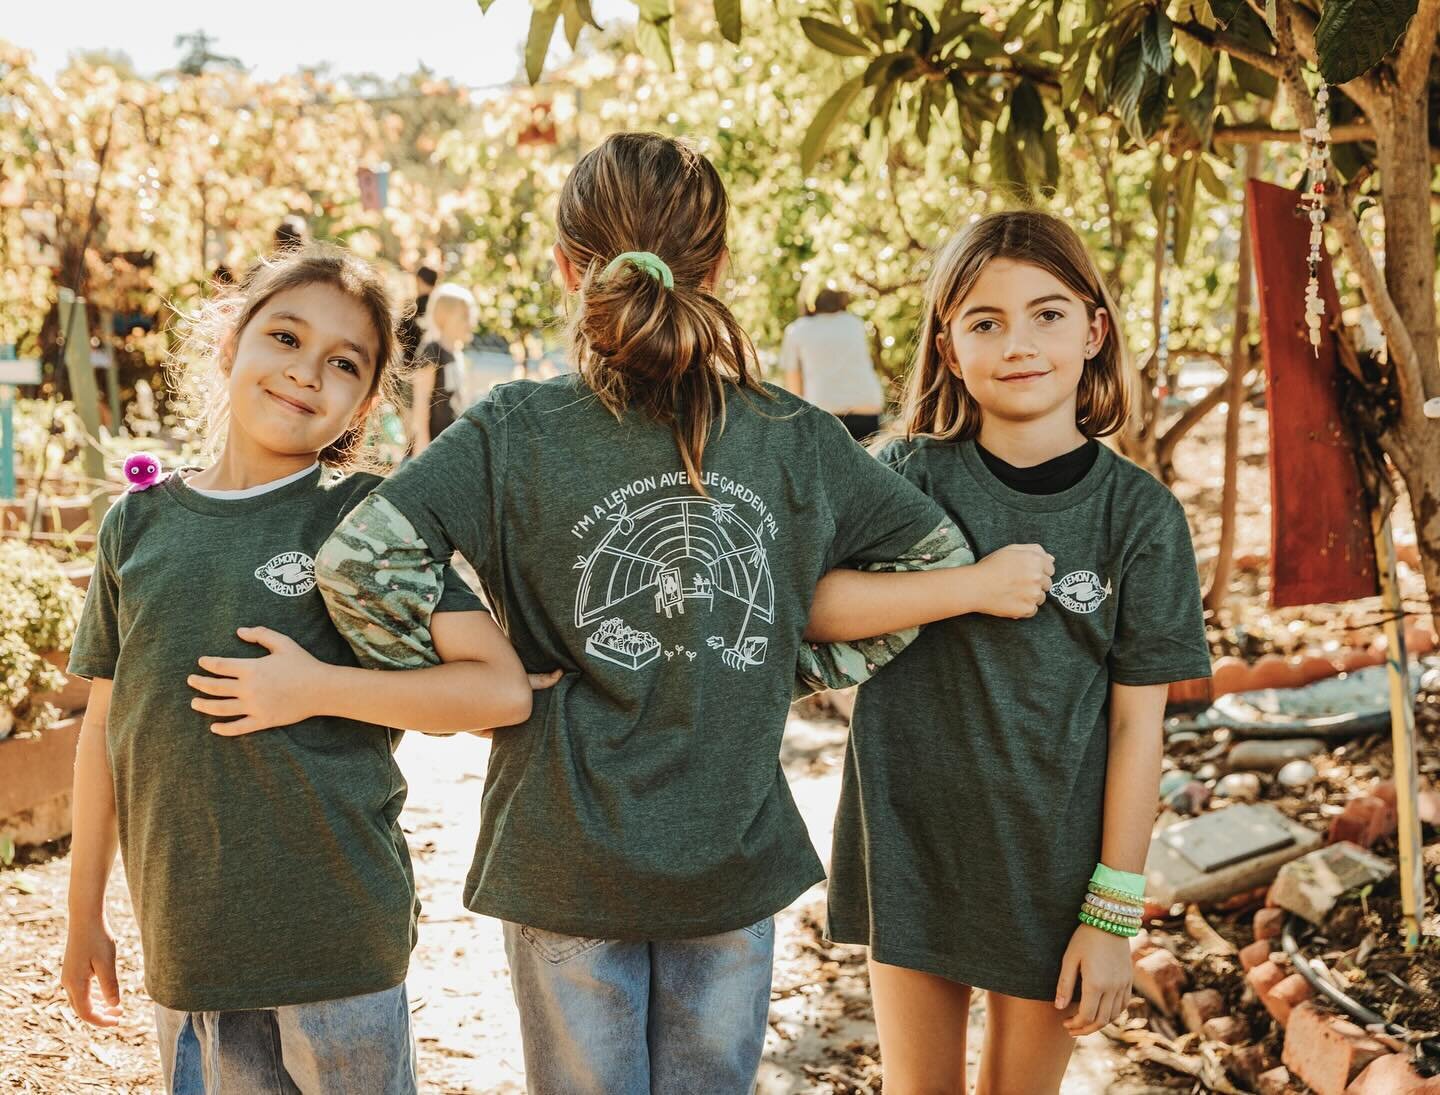 Hello Garden Pals!&nbsp; Be sure to sport your Garden Pal T-shirts on your class visits to help spread the word.  Your support goes so far.

If you would still like to donate please see the link in our bio. 
.
.
.

@lemon_ave_leopards
#lemonavegarden